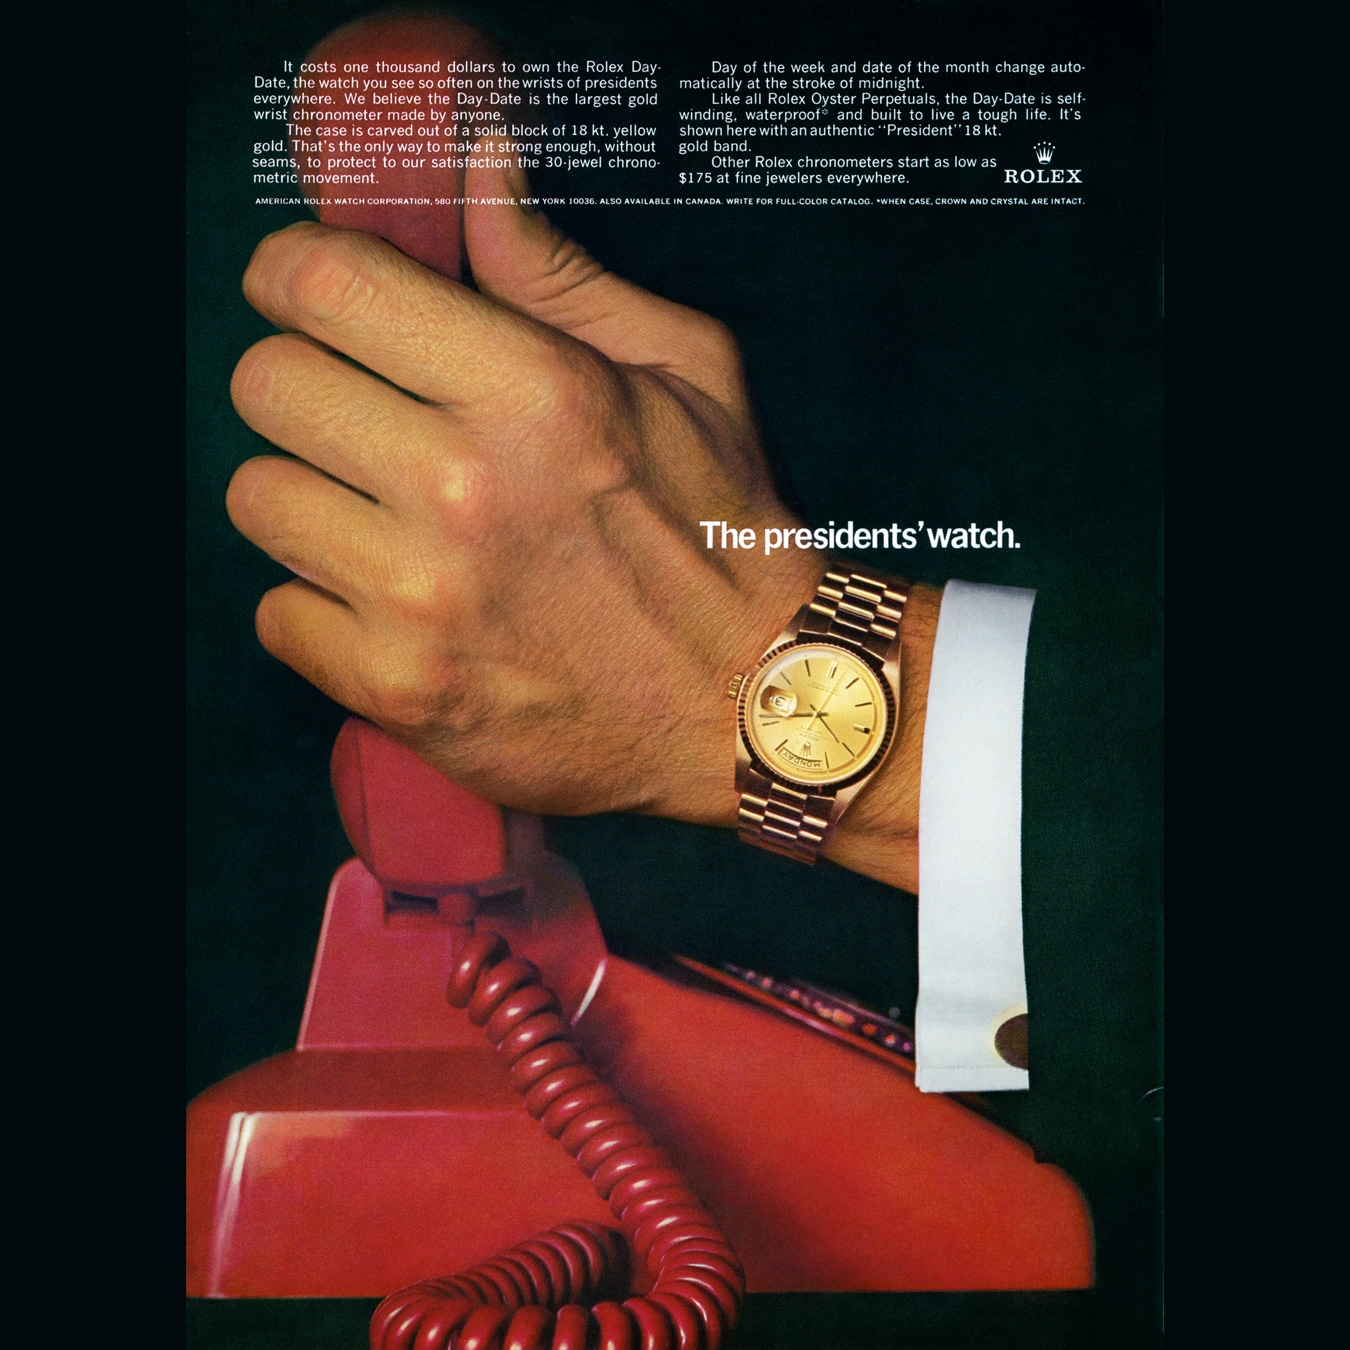 Rolex watch is worn in a hand while holding a red phone